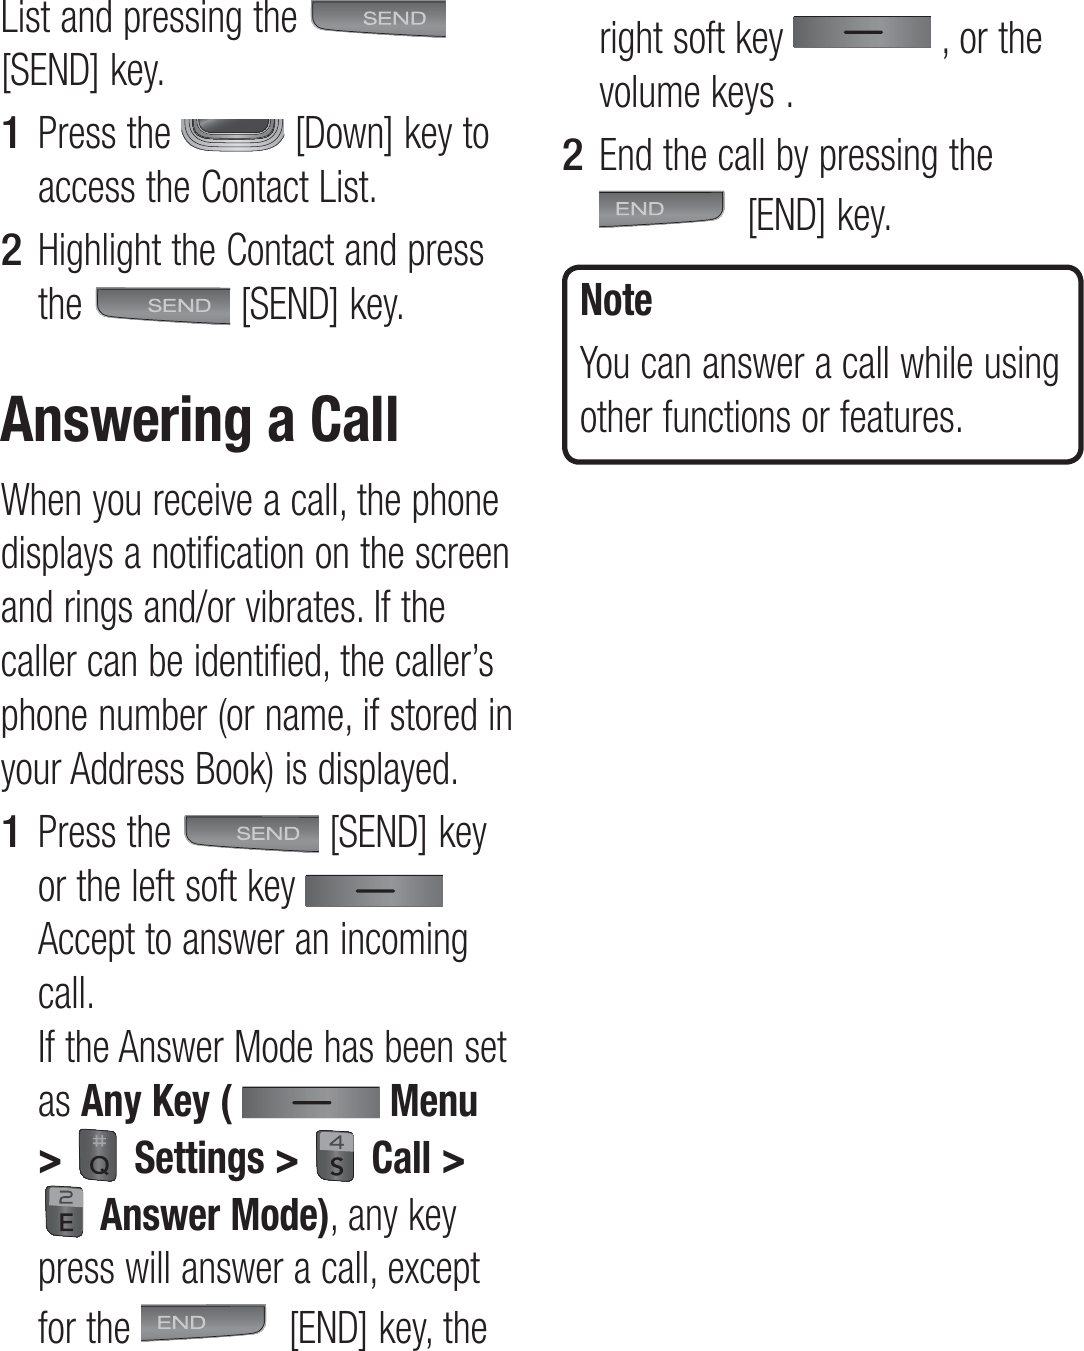 List and pressing the   [SEND] key.Press the   [Down] key to access the Contact List.Highlight the Contact and press the   [SEND] key.Answering a CallWhen you receive a call, the phone displays a notification on the screen and rings and/or vibrates. If the caller can be identified, the caller’s phone number (or name, if stored in your Address Book) is displayed.Press the   [SEND] key or the left soft key   Accept to answer an incoming call.  If the Answer Mode has been set as Any Key (  Menu &gt;  Settings &gt;  Call &gt;  Answer Mode), any key press will answer a call, except for the   [END] key, the 1 2 1 right soft key   , or the volume keys .End the call by pressing the  [END] key.NoteYou can answer a call while using other functions or features.2 